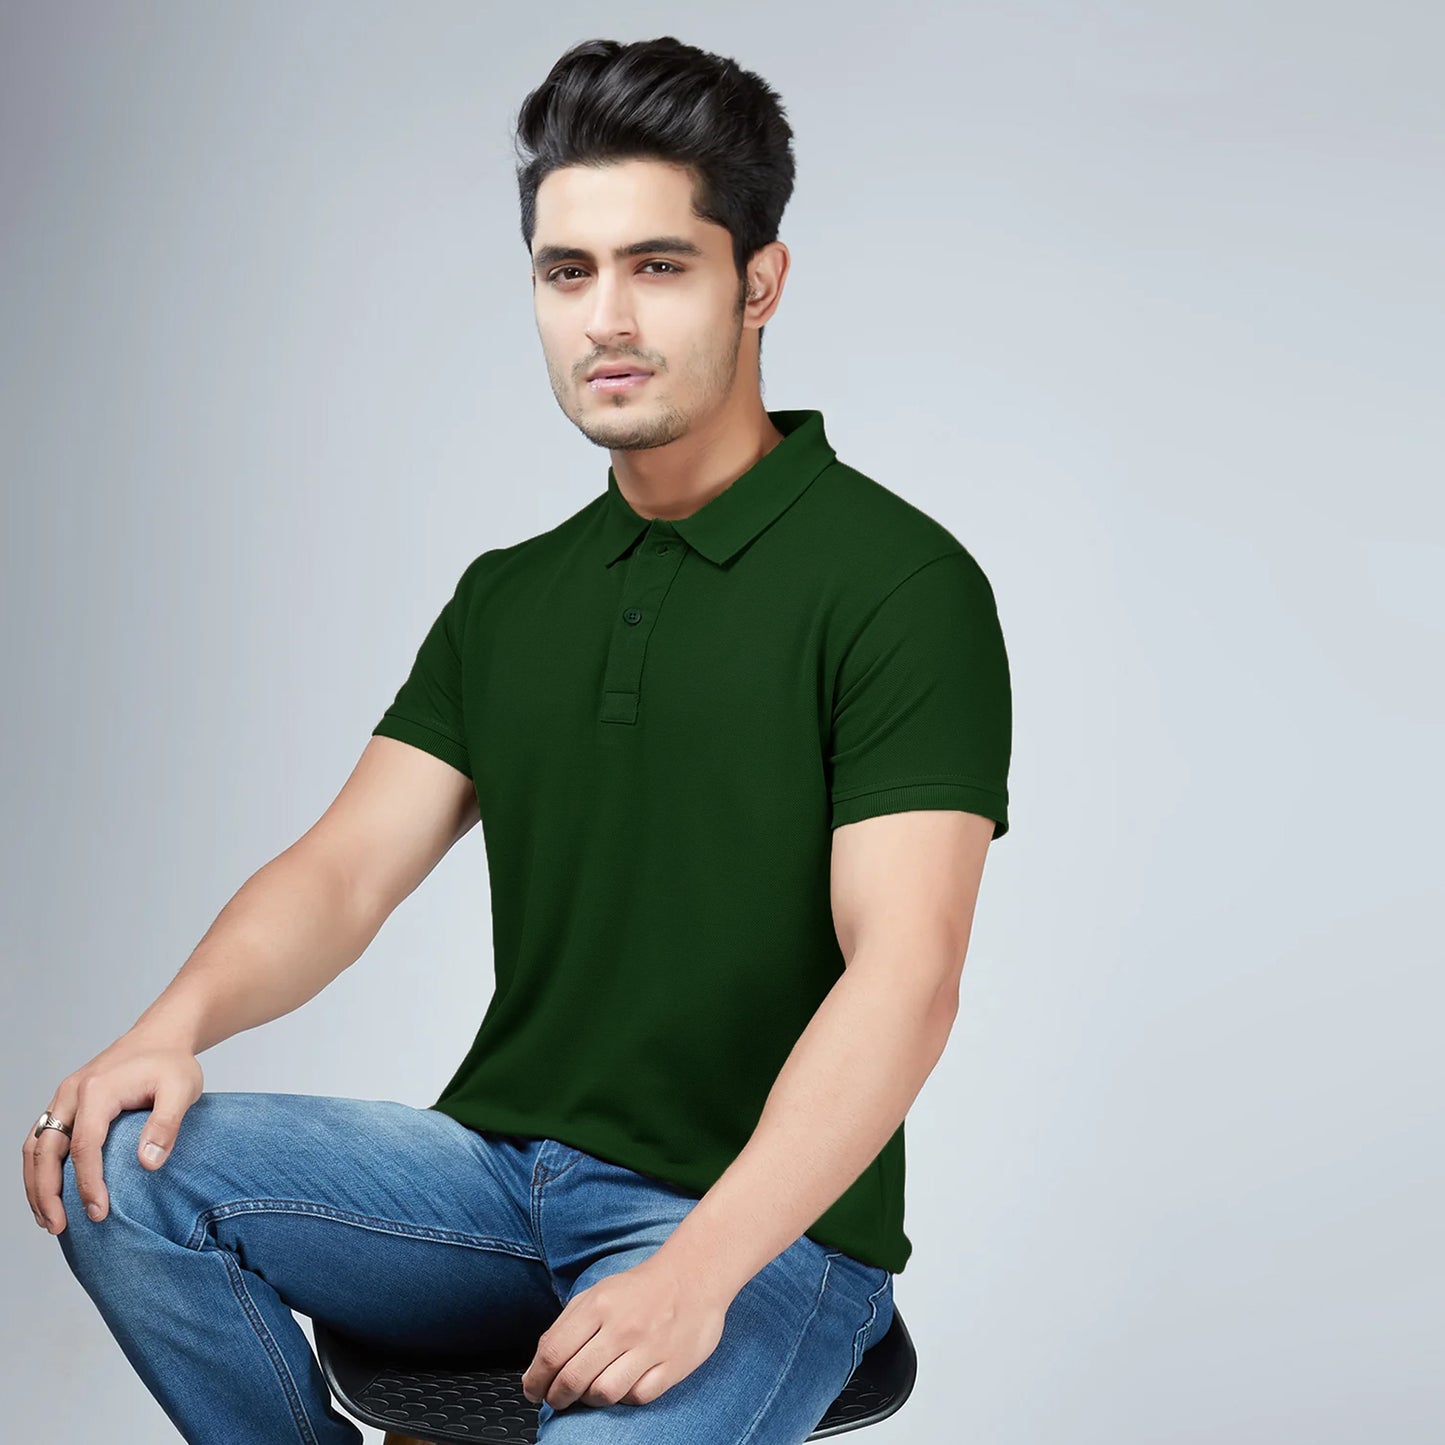 Men's Olive Green Polo T-Shirt